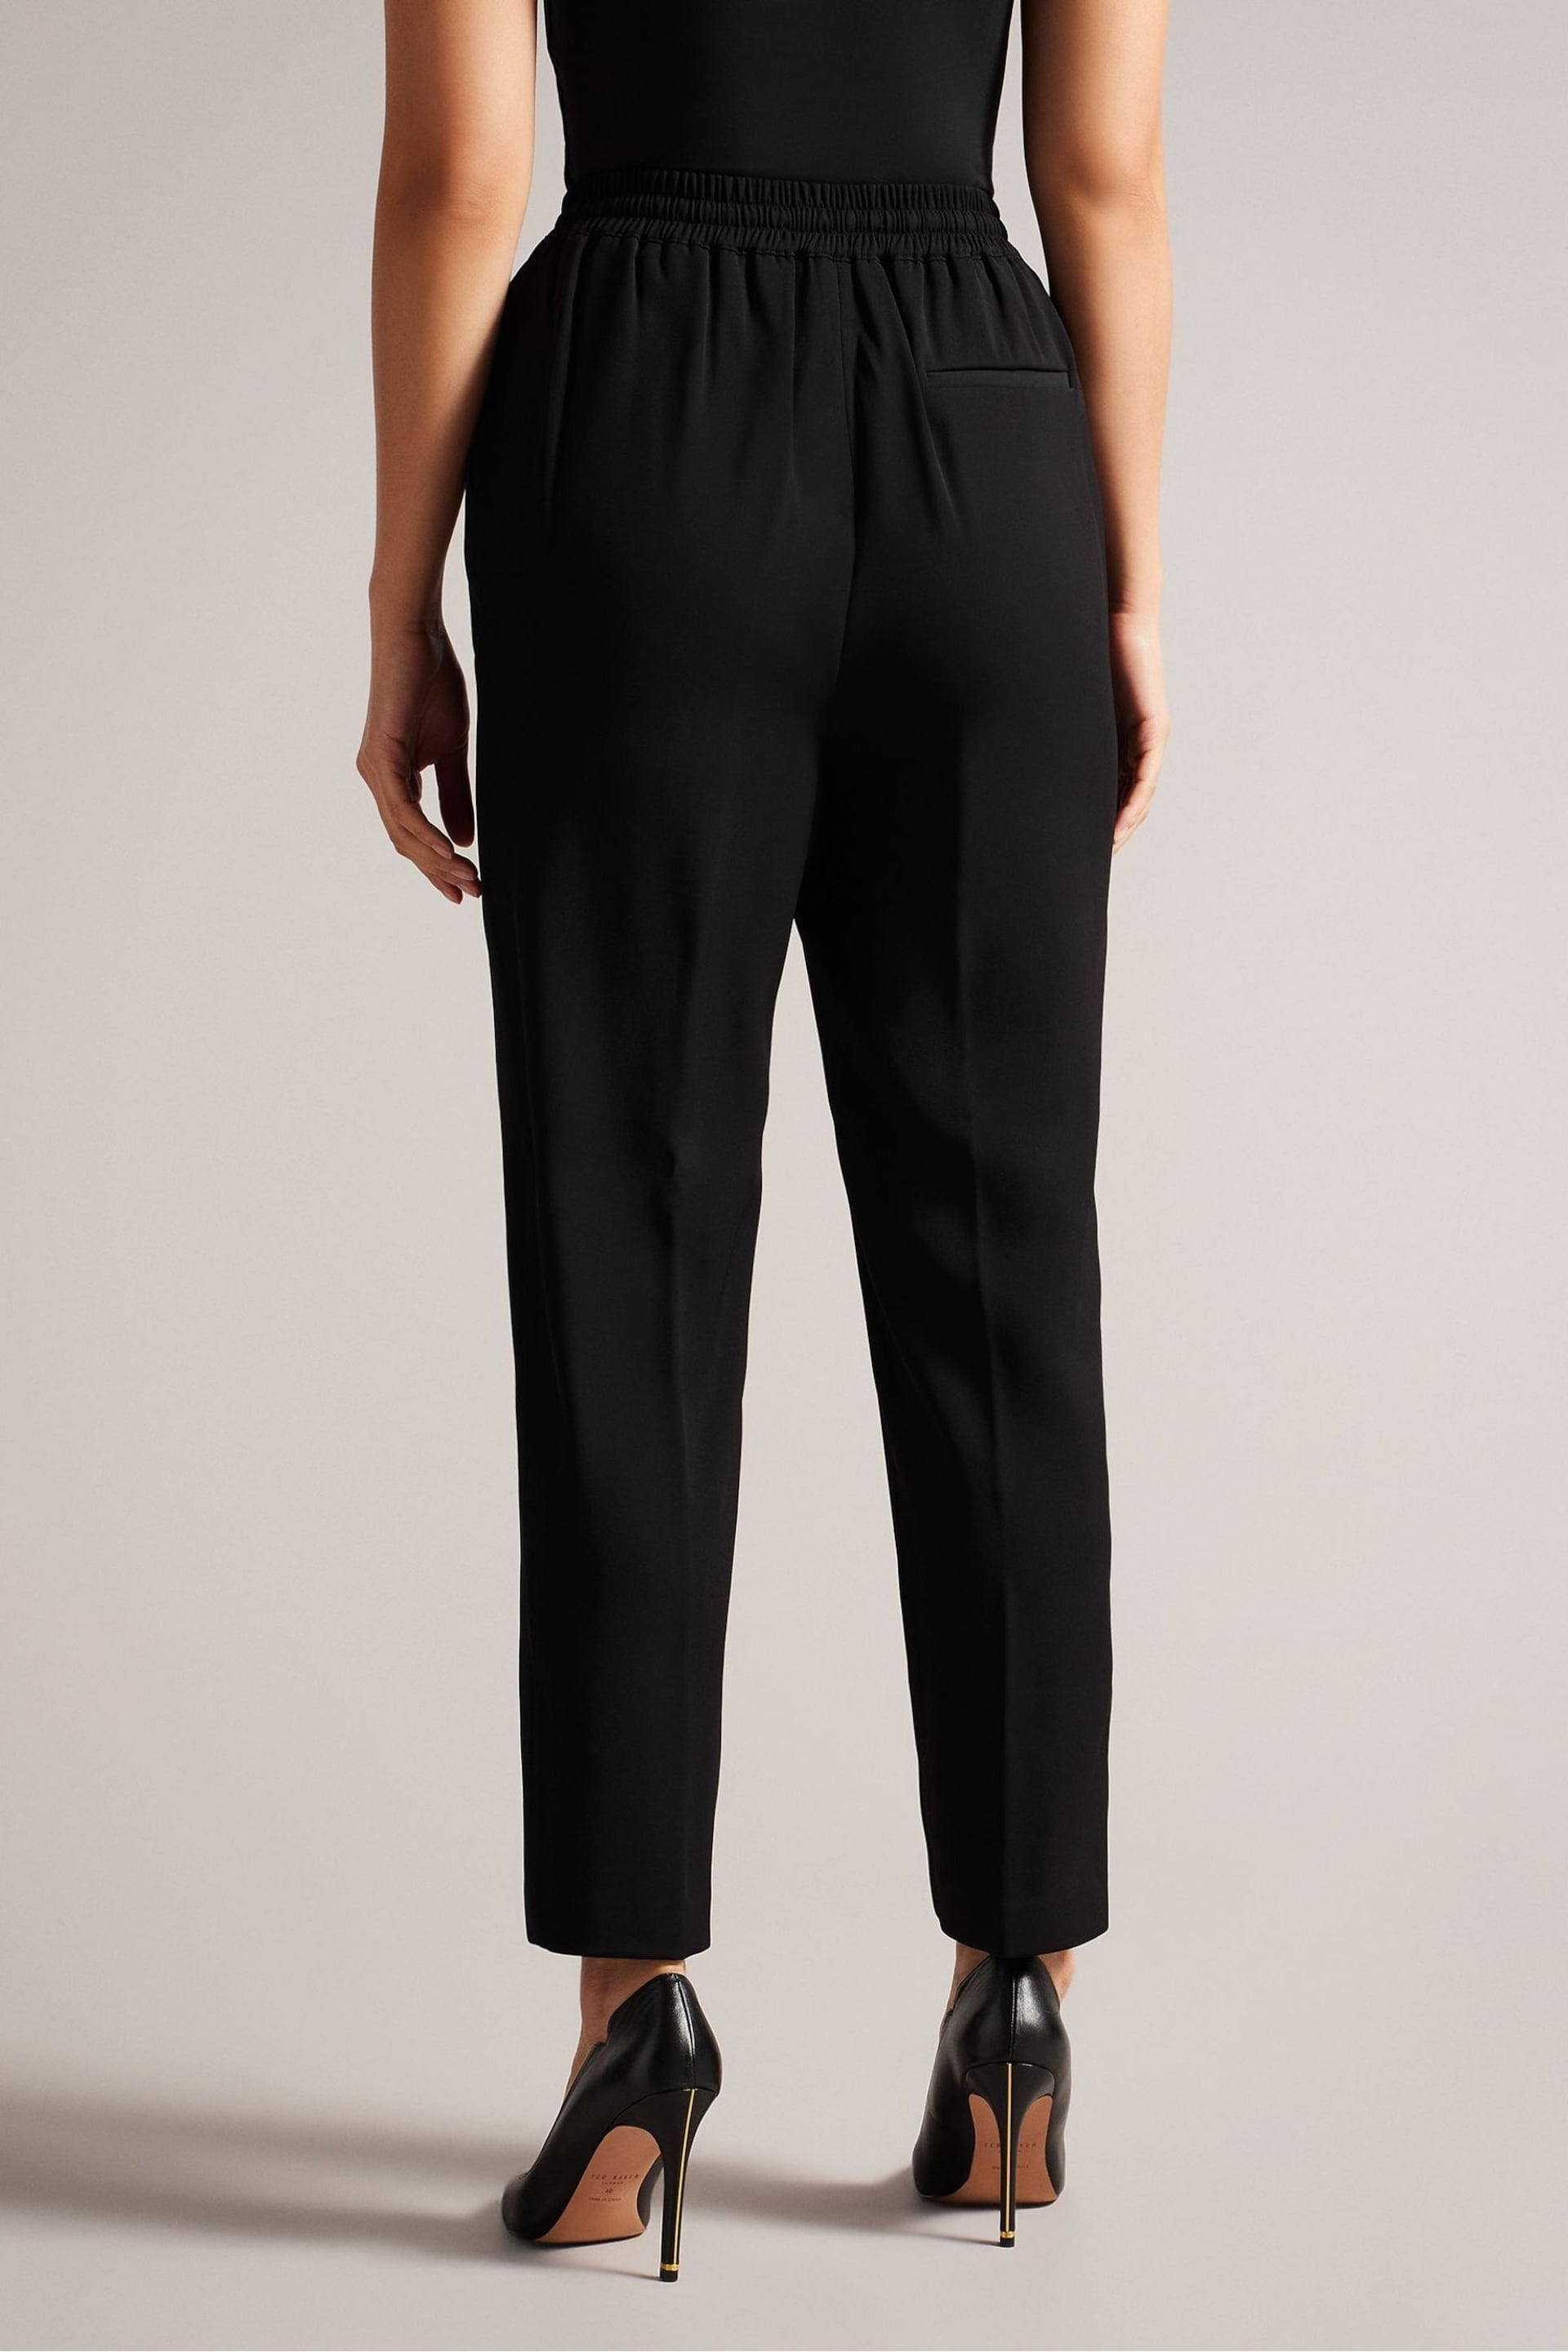 Ted Baker Black Slim Laurai Cut Ankle Length Joggers - Image 3 of 5